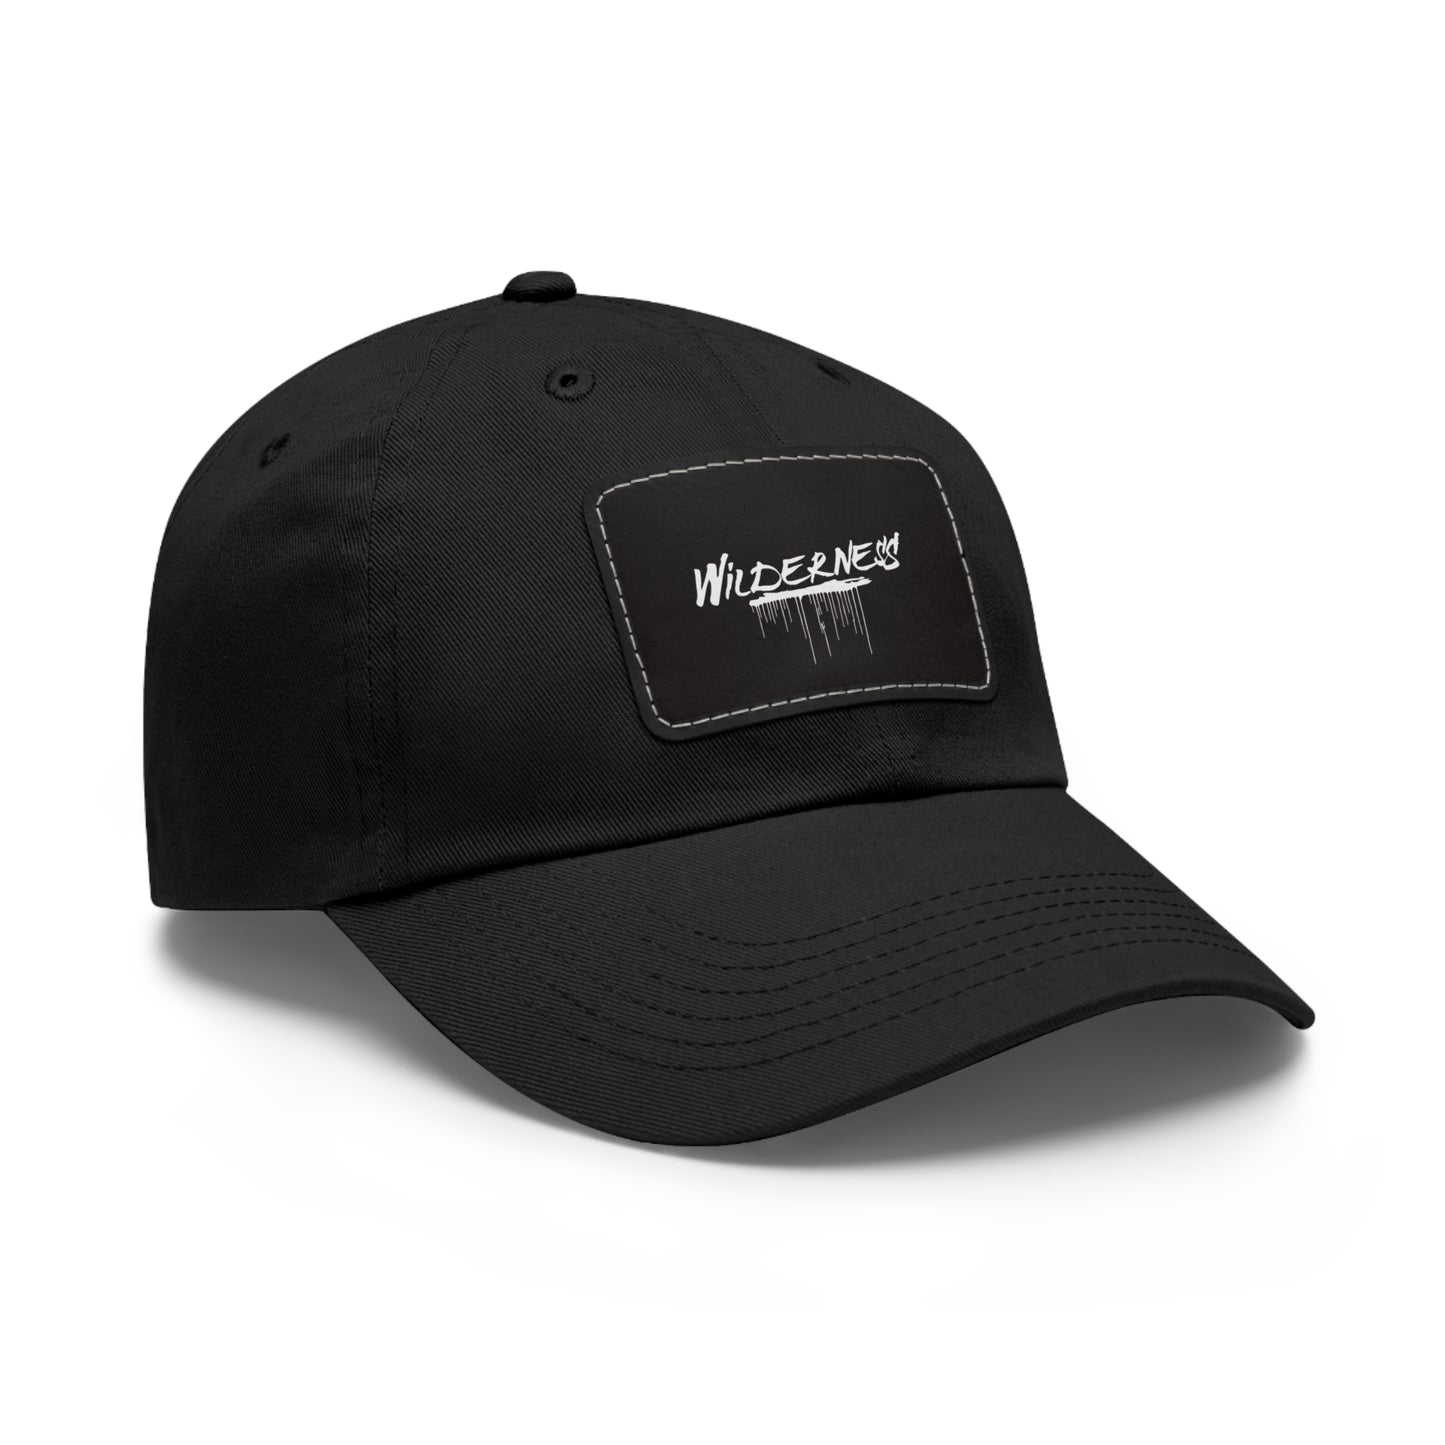 Baseball Cap with Leather Patch (Rectangle)